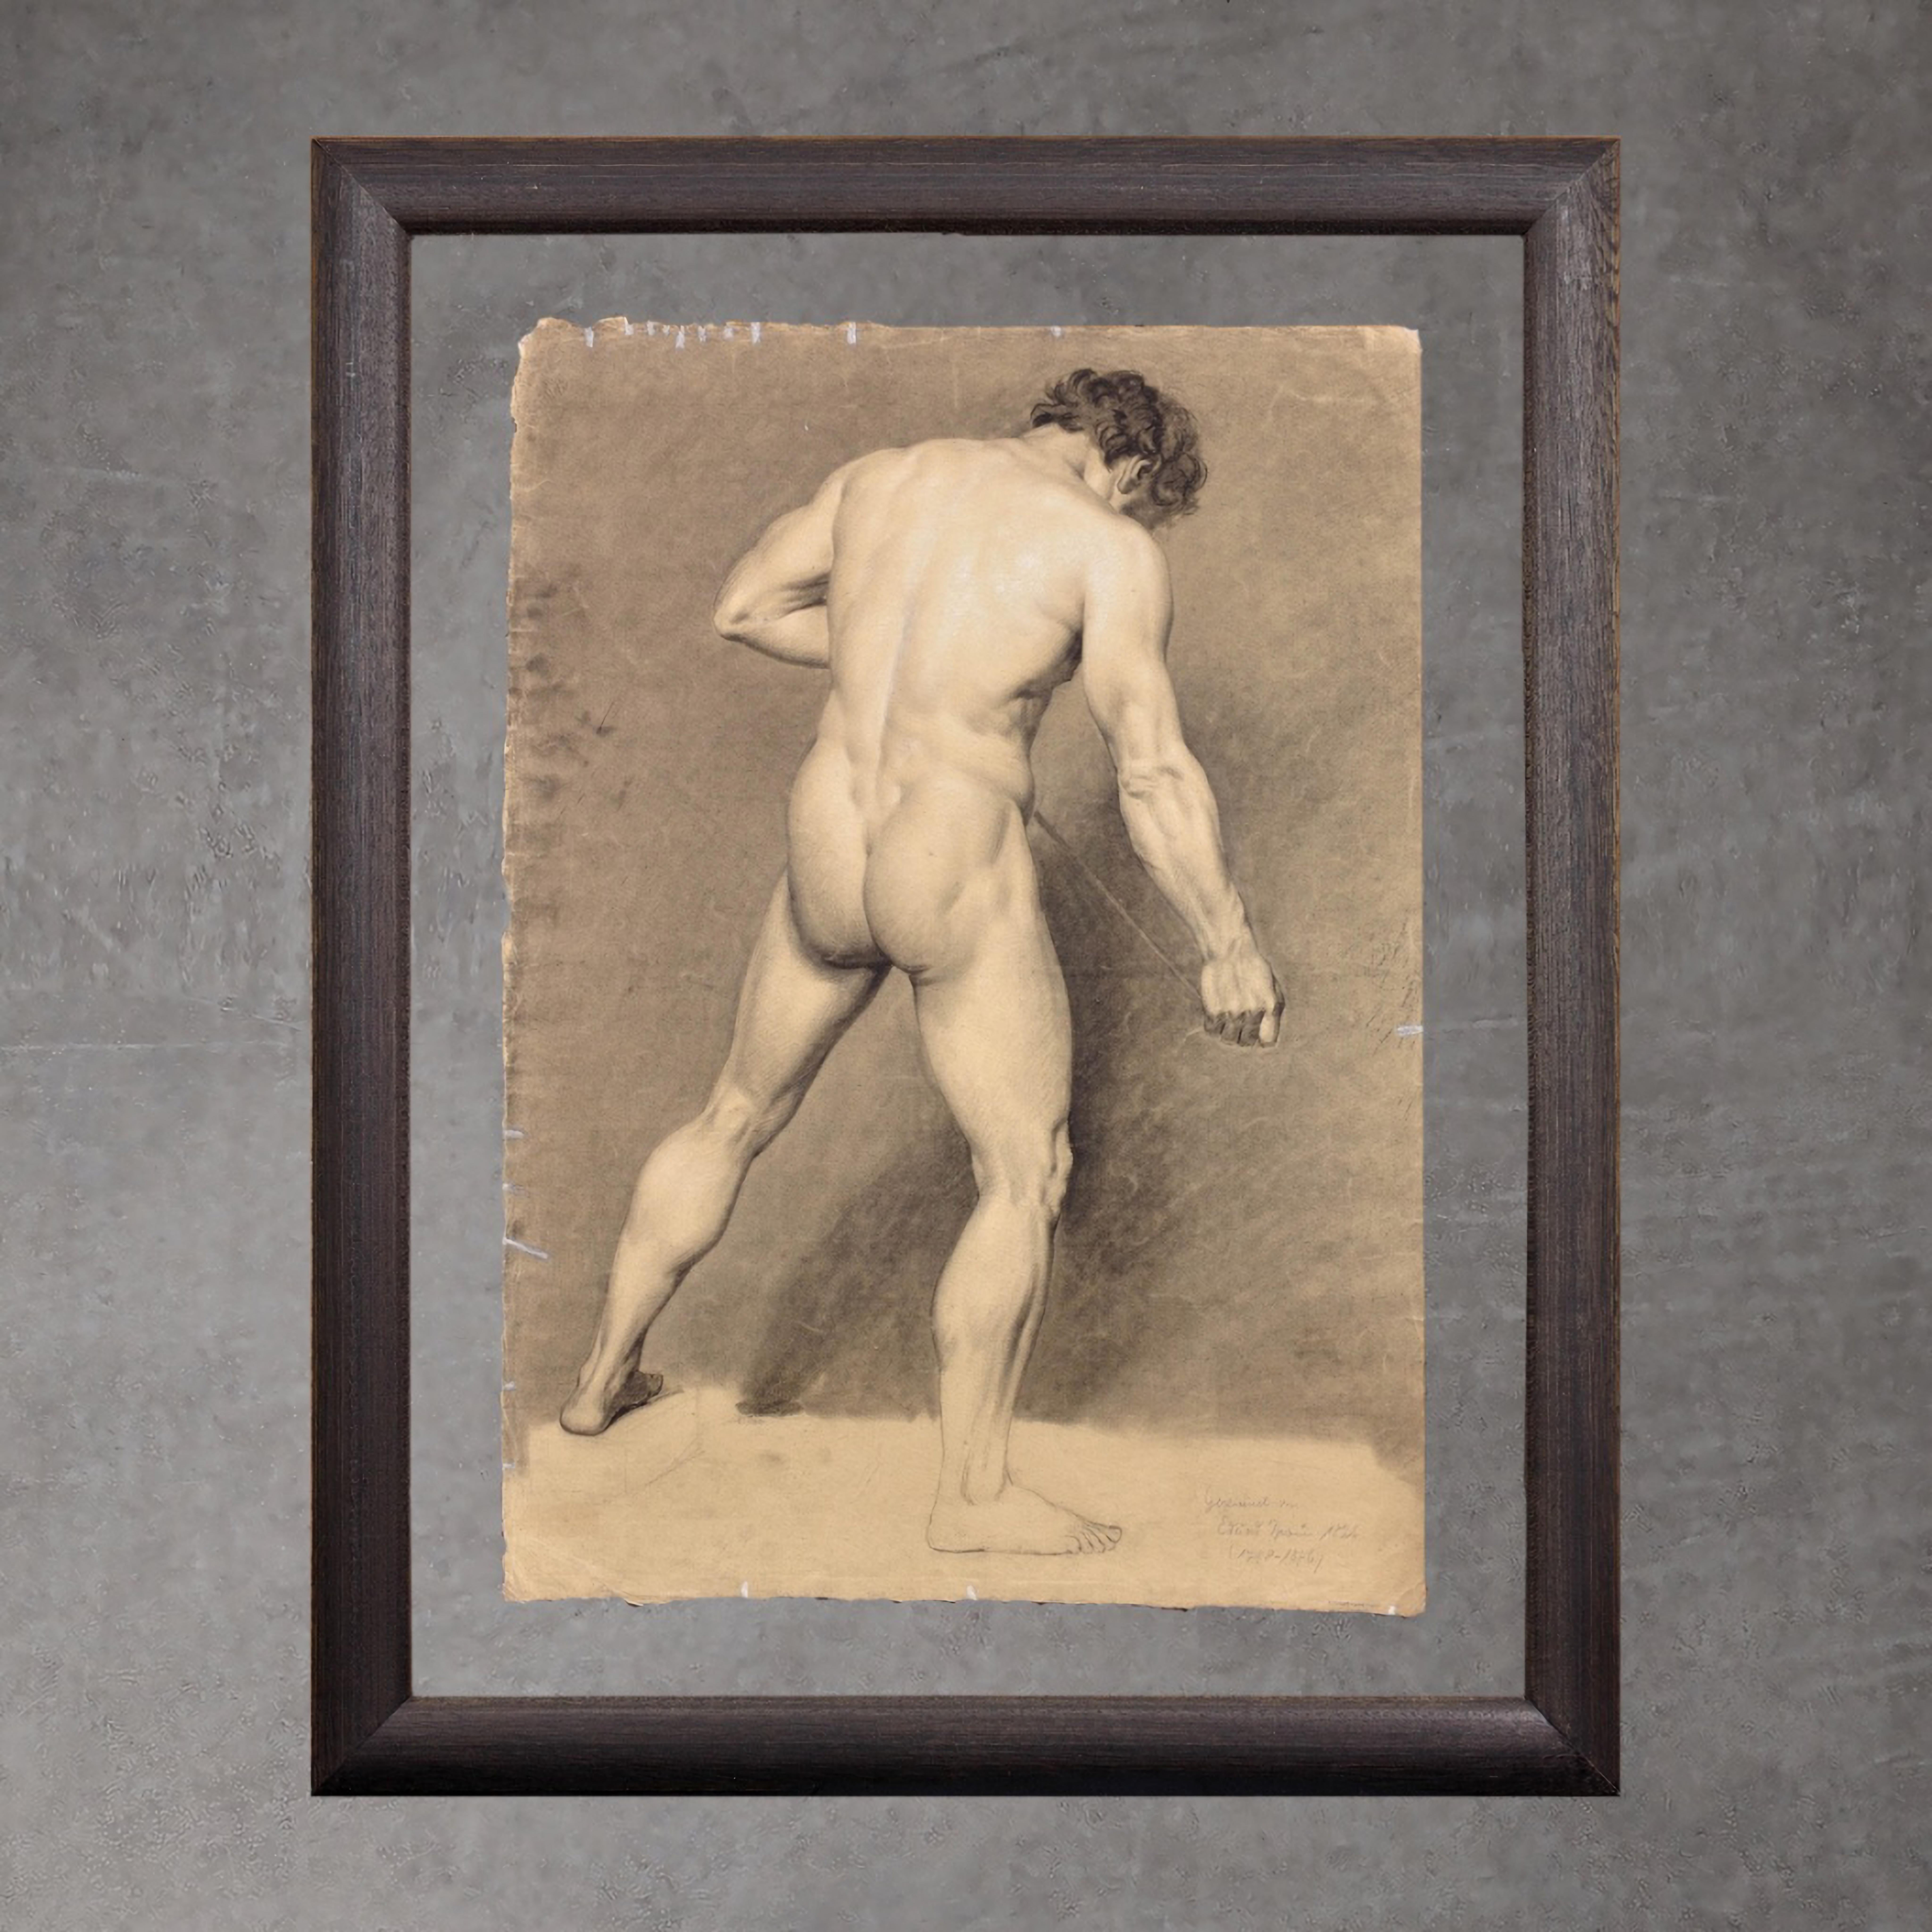 Academic Life Studies of Male Nudes. Double Sided Rear View and Arms Aloft Pose - Art by Eduard Braun